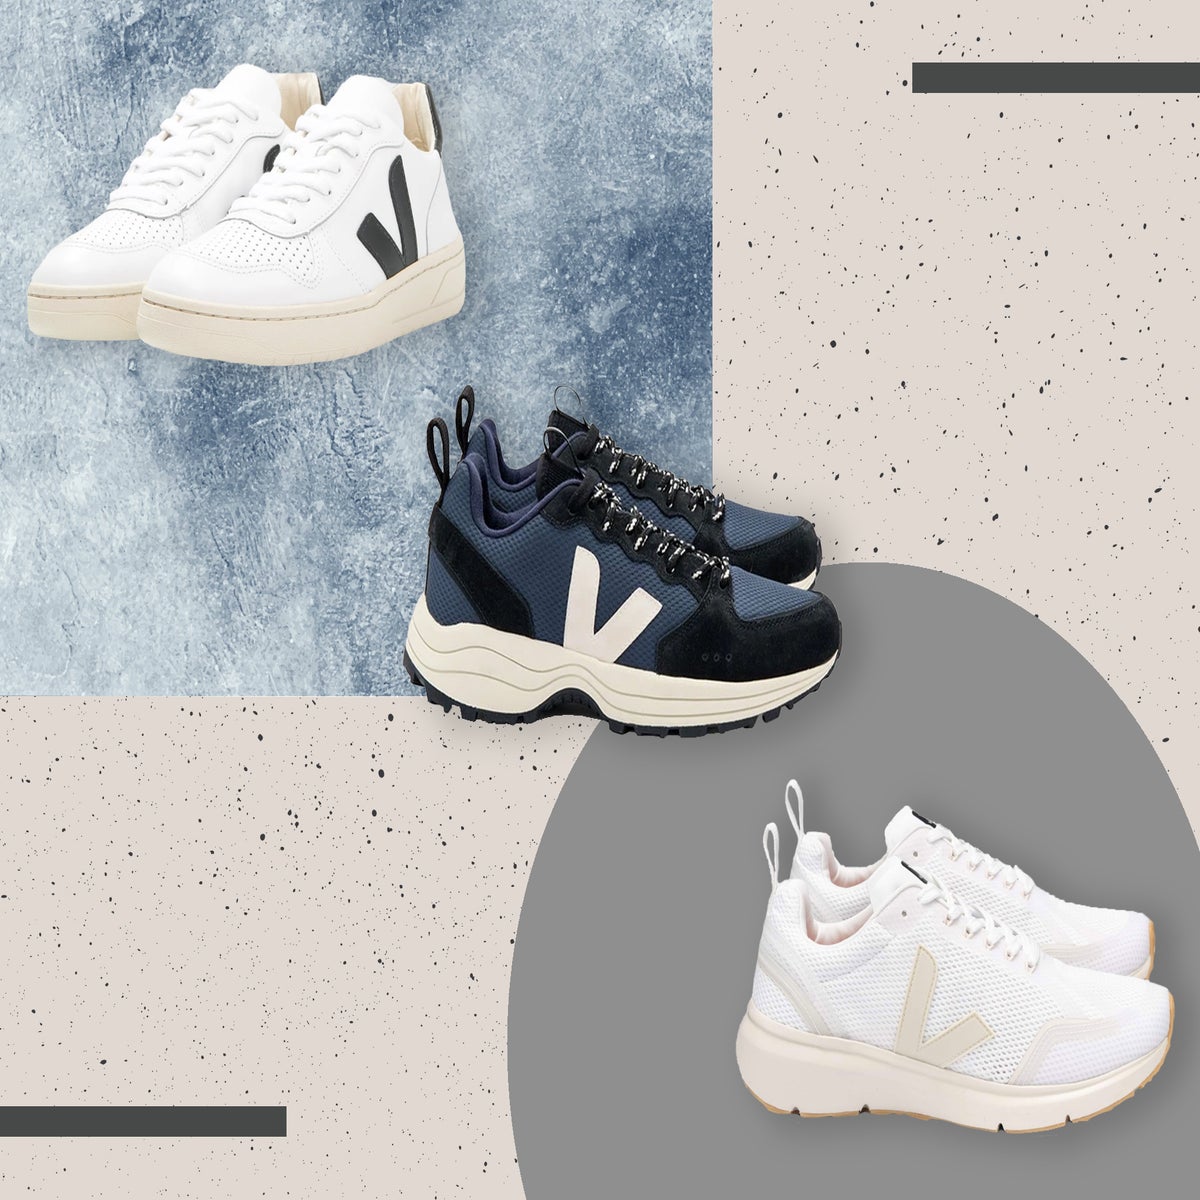 trainers: Which shoes should you | The Independent